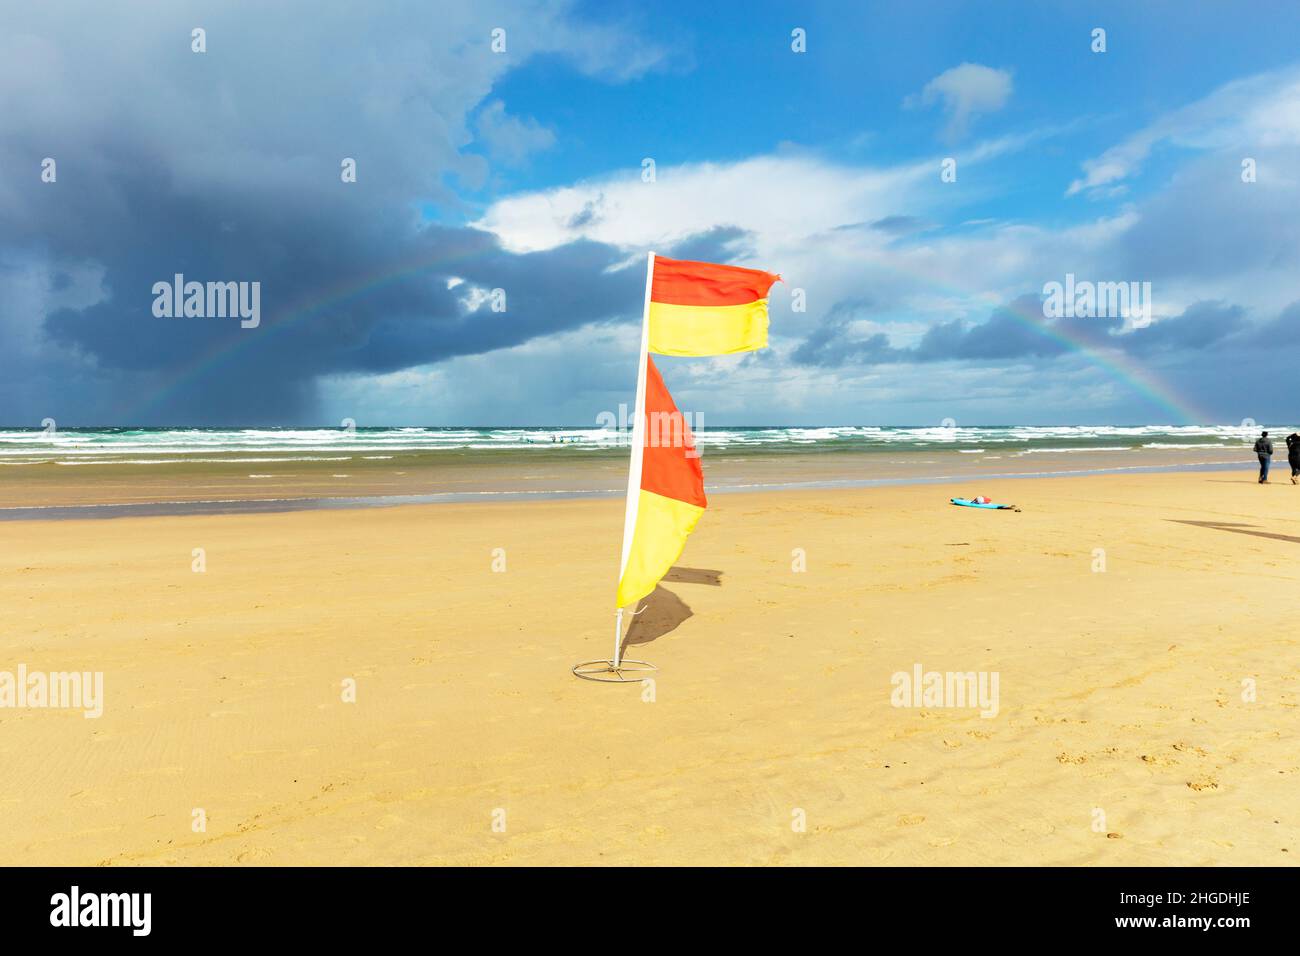 Designated bathing areas are marked out on beaches using the RNLI's red and yellow flags. These flags indicate areas patrolled by lifeguards. In desig Stock Photo